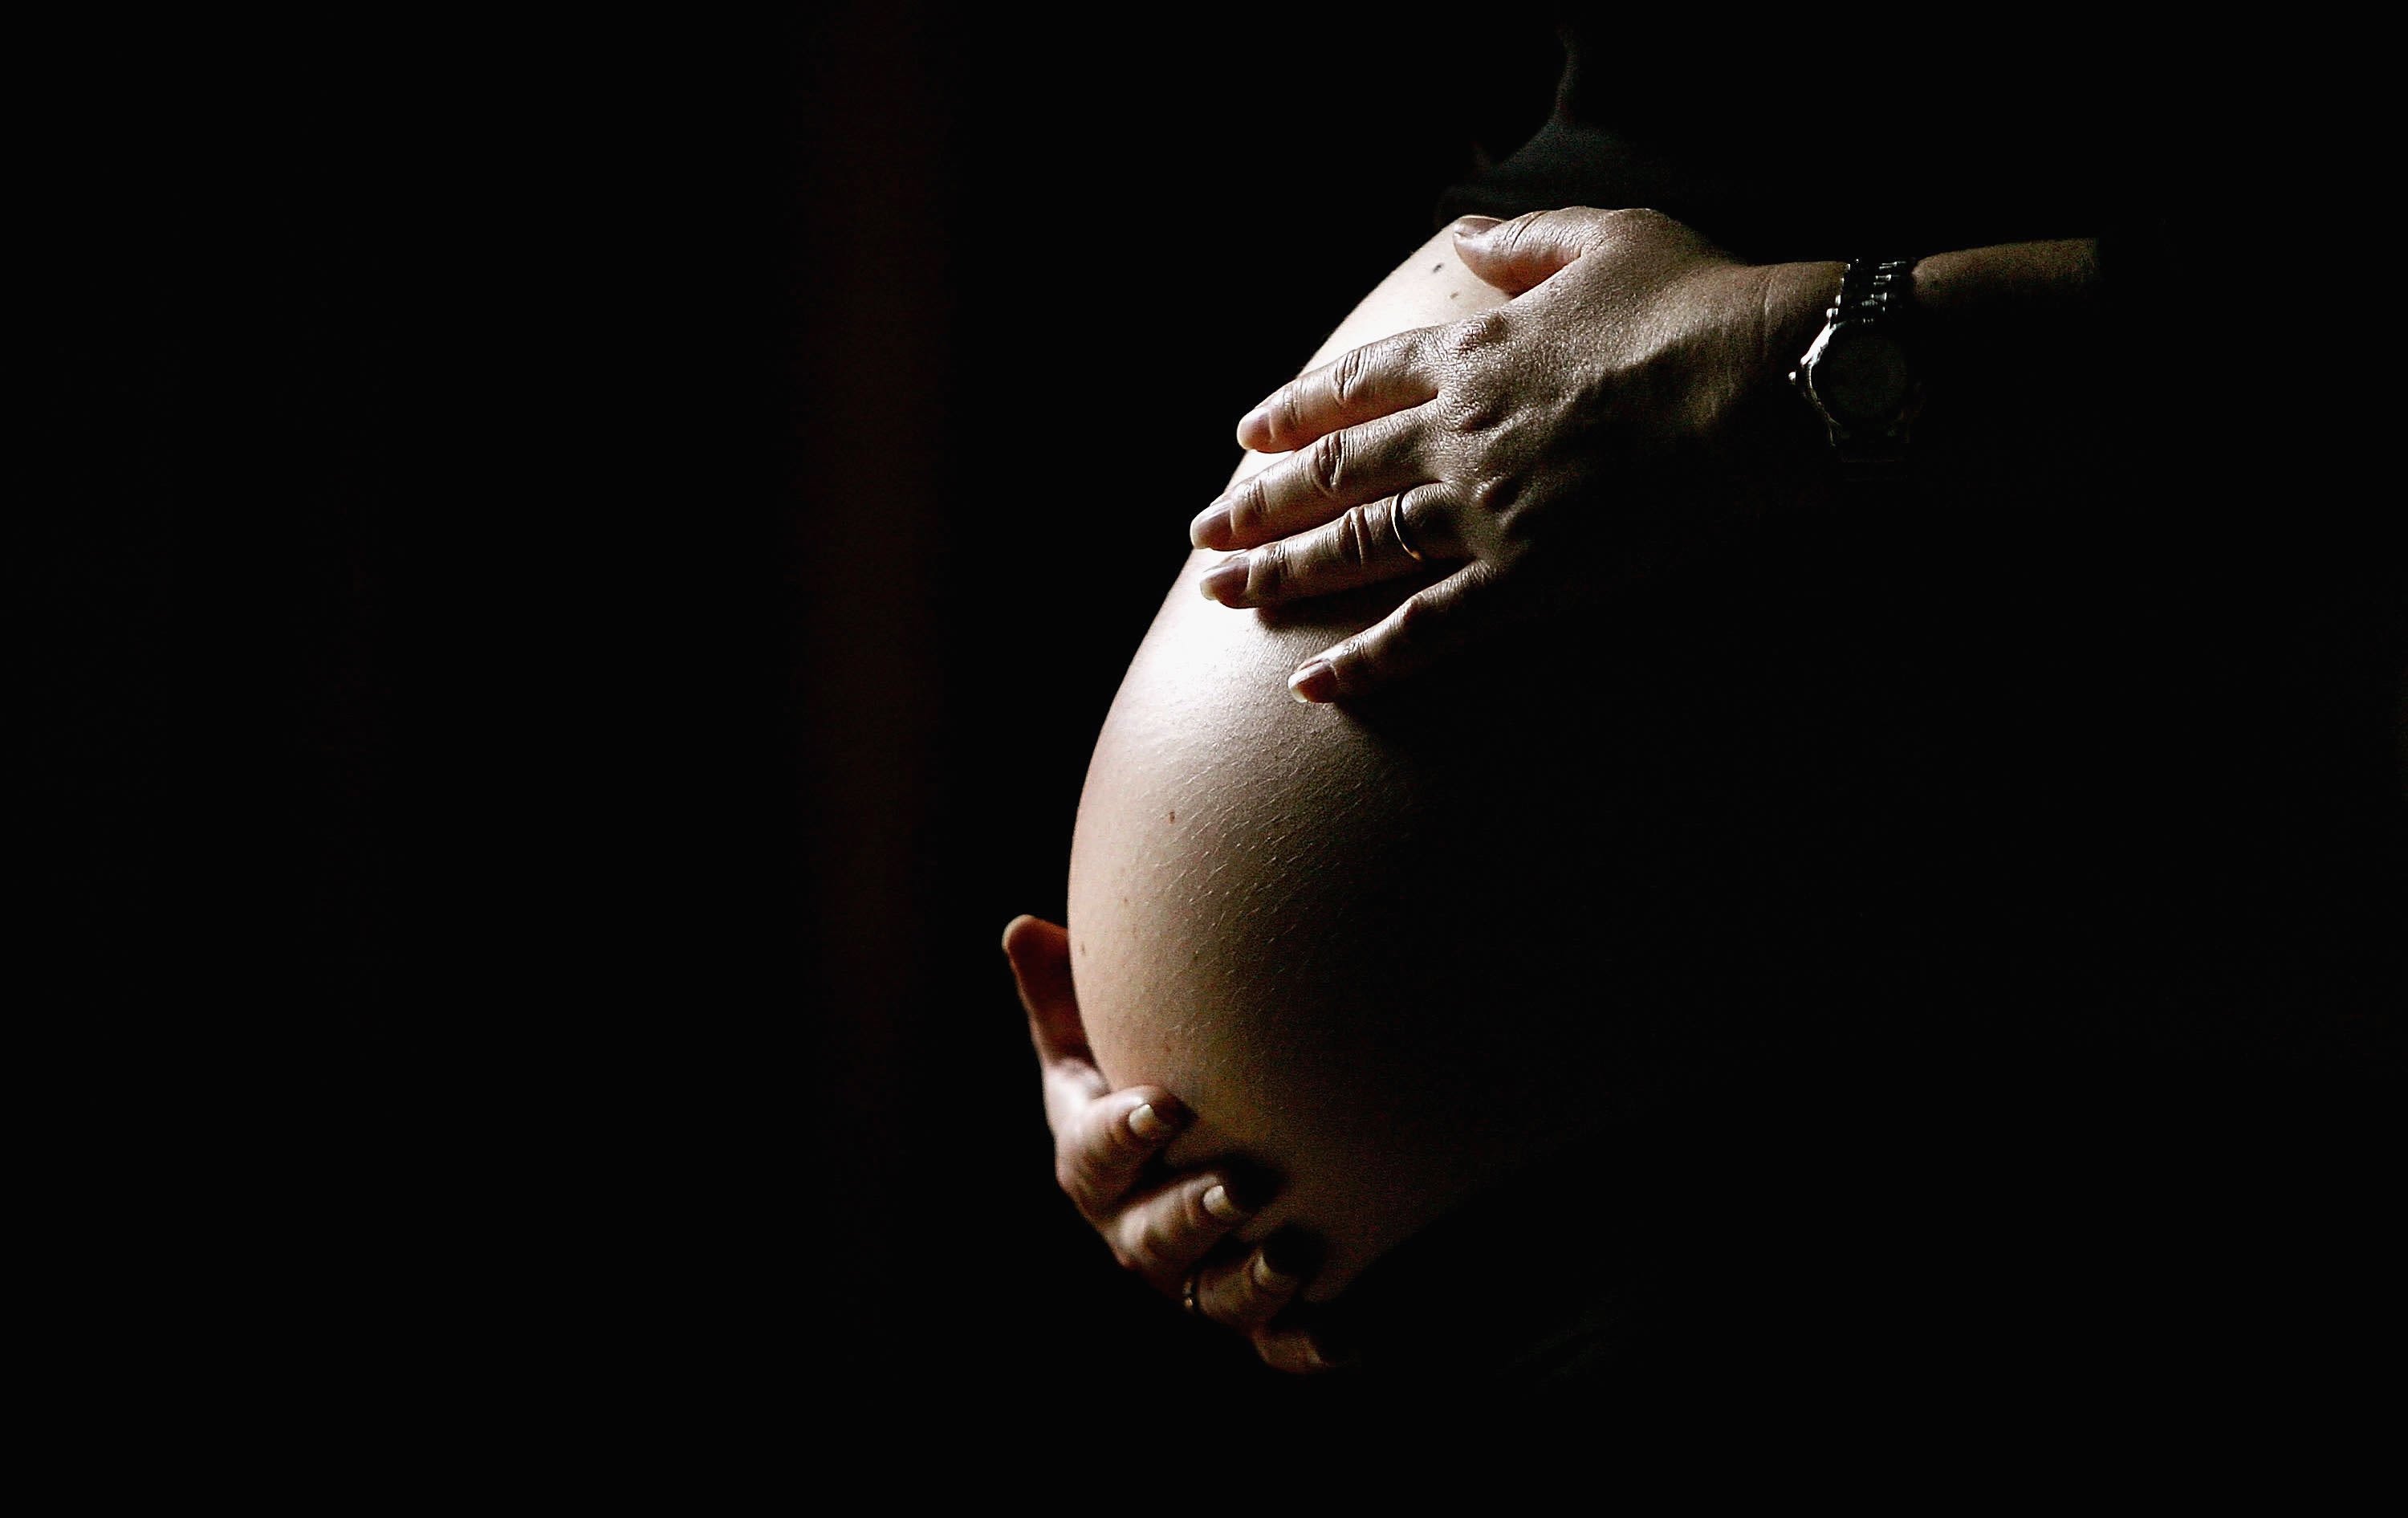 I'm Black, Pregnant, and Afraid of Dying During Birth